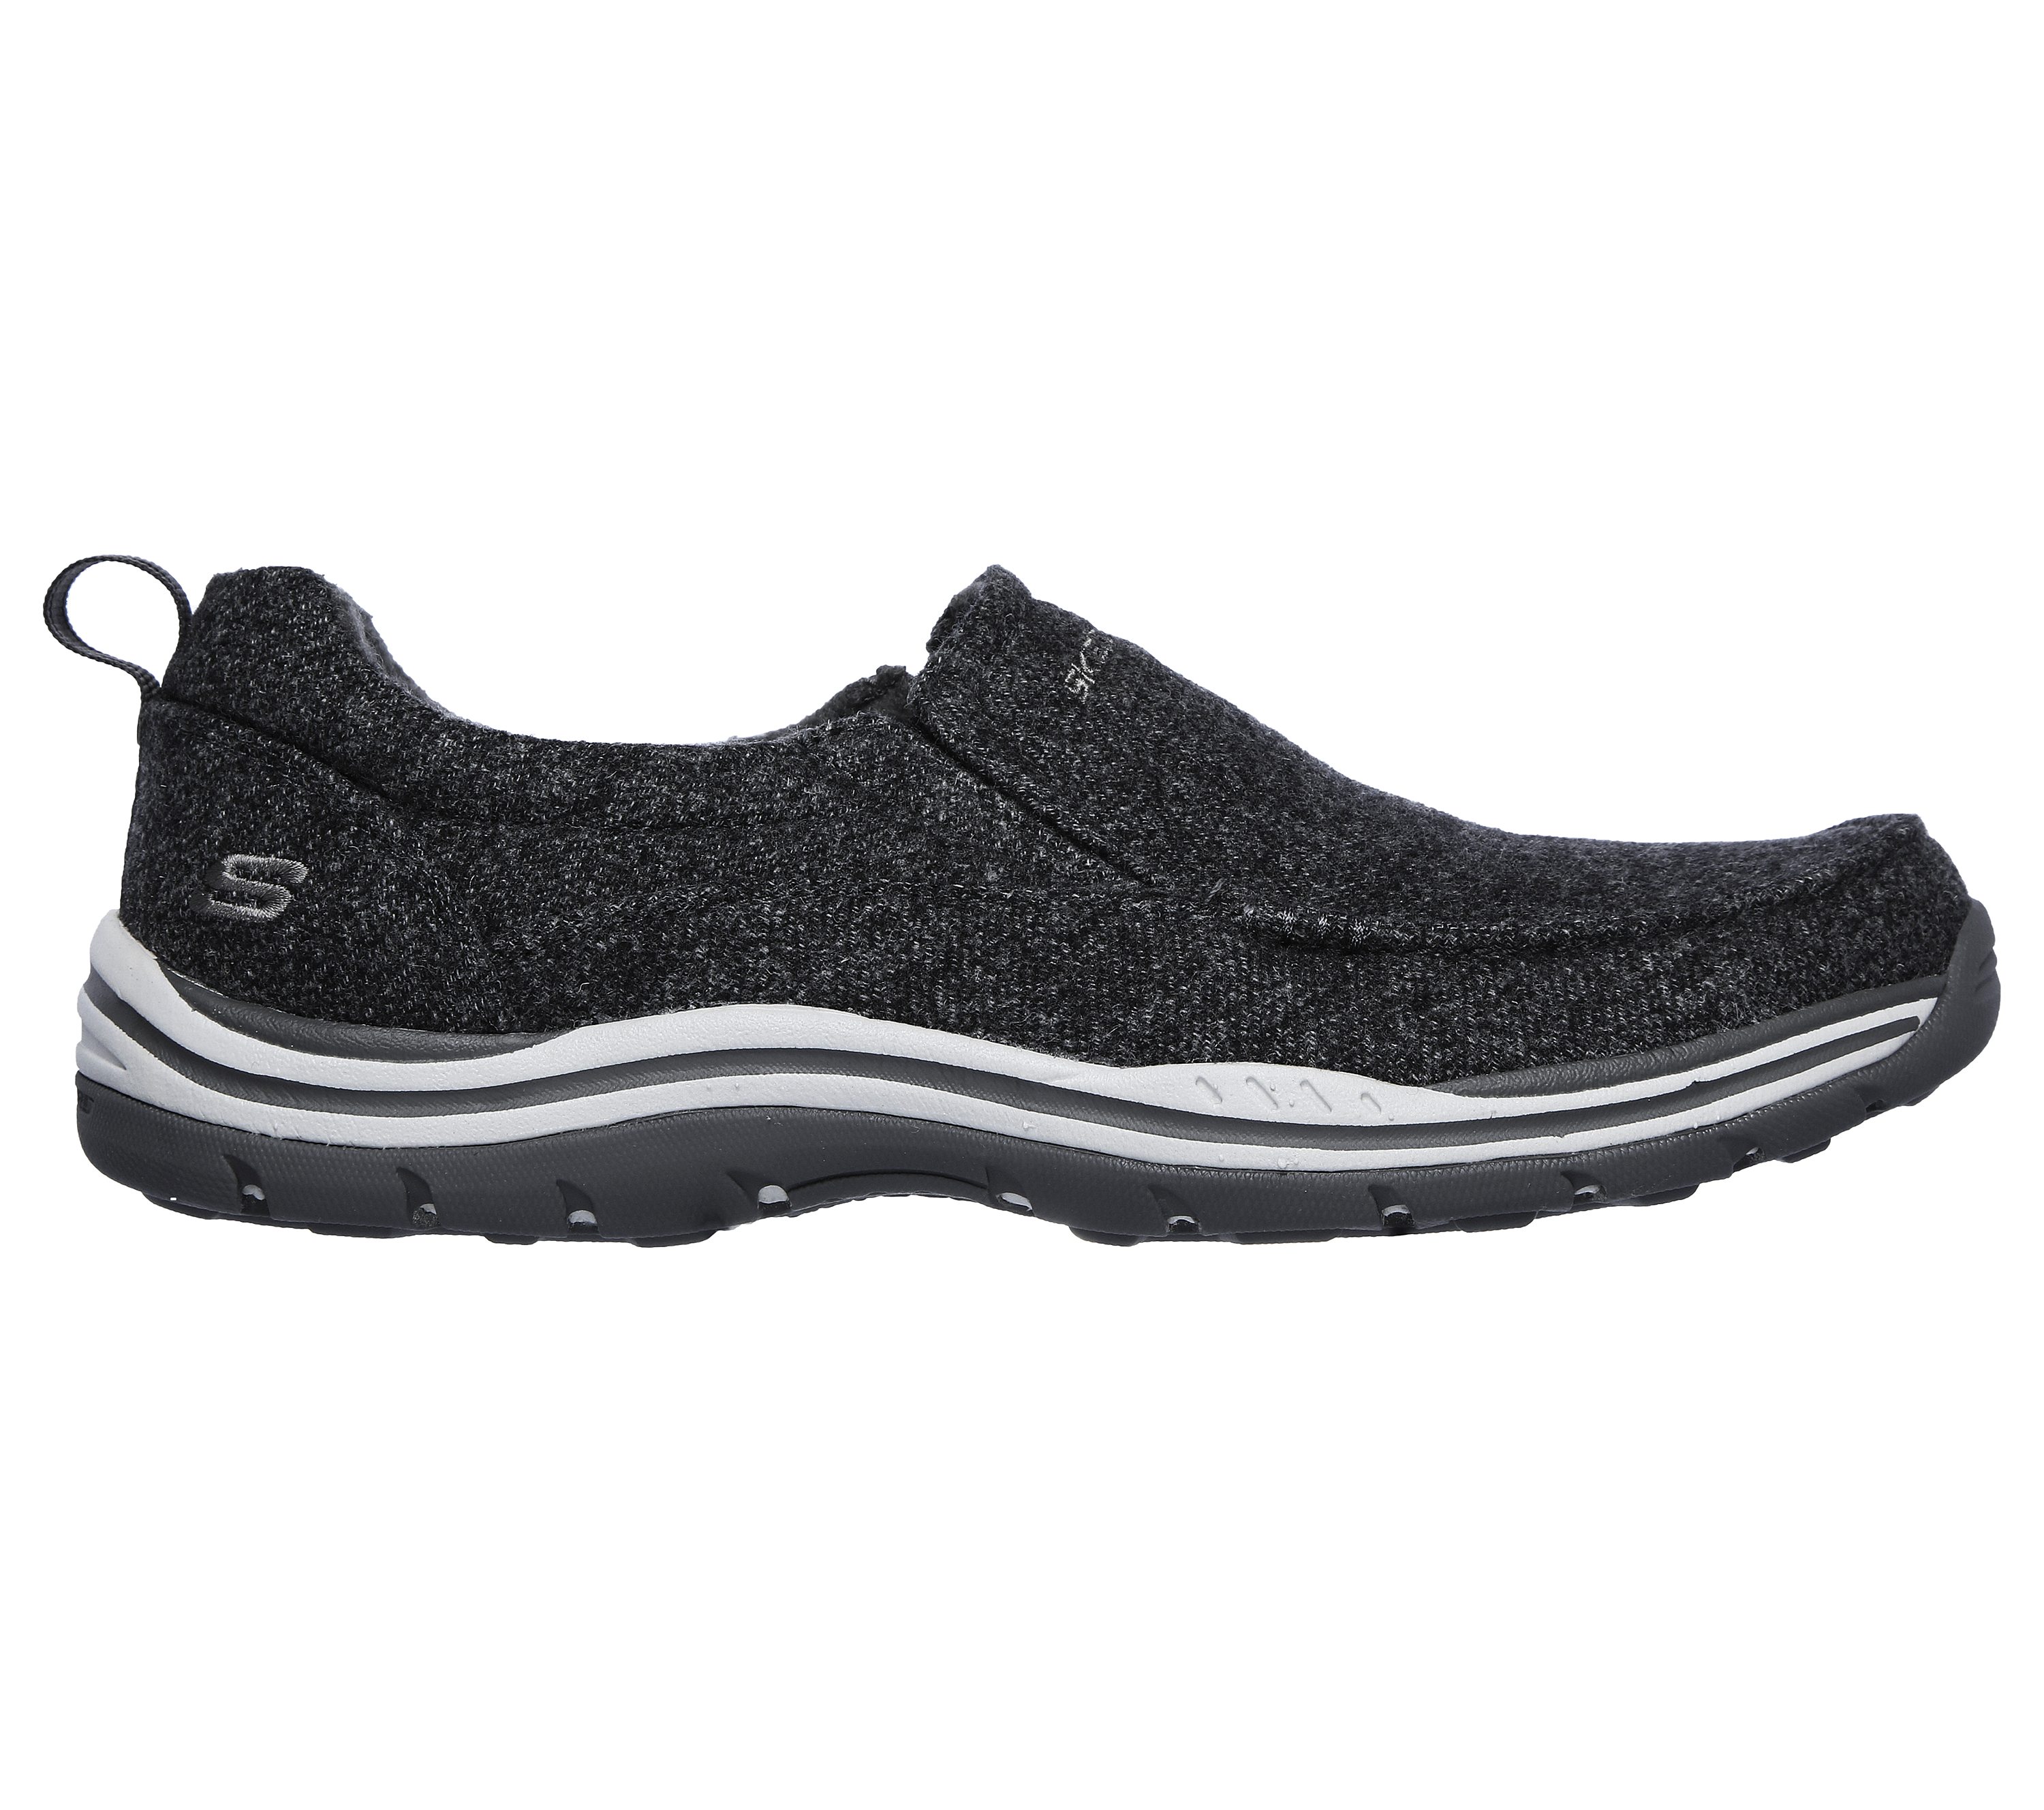 can skechers shoes be washed